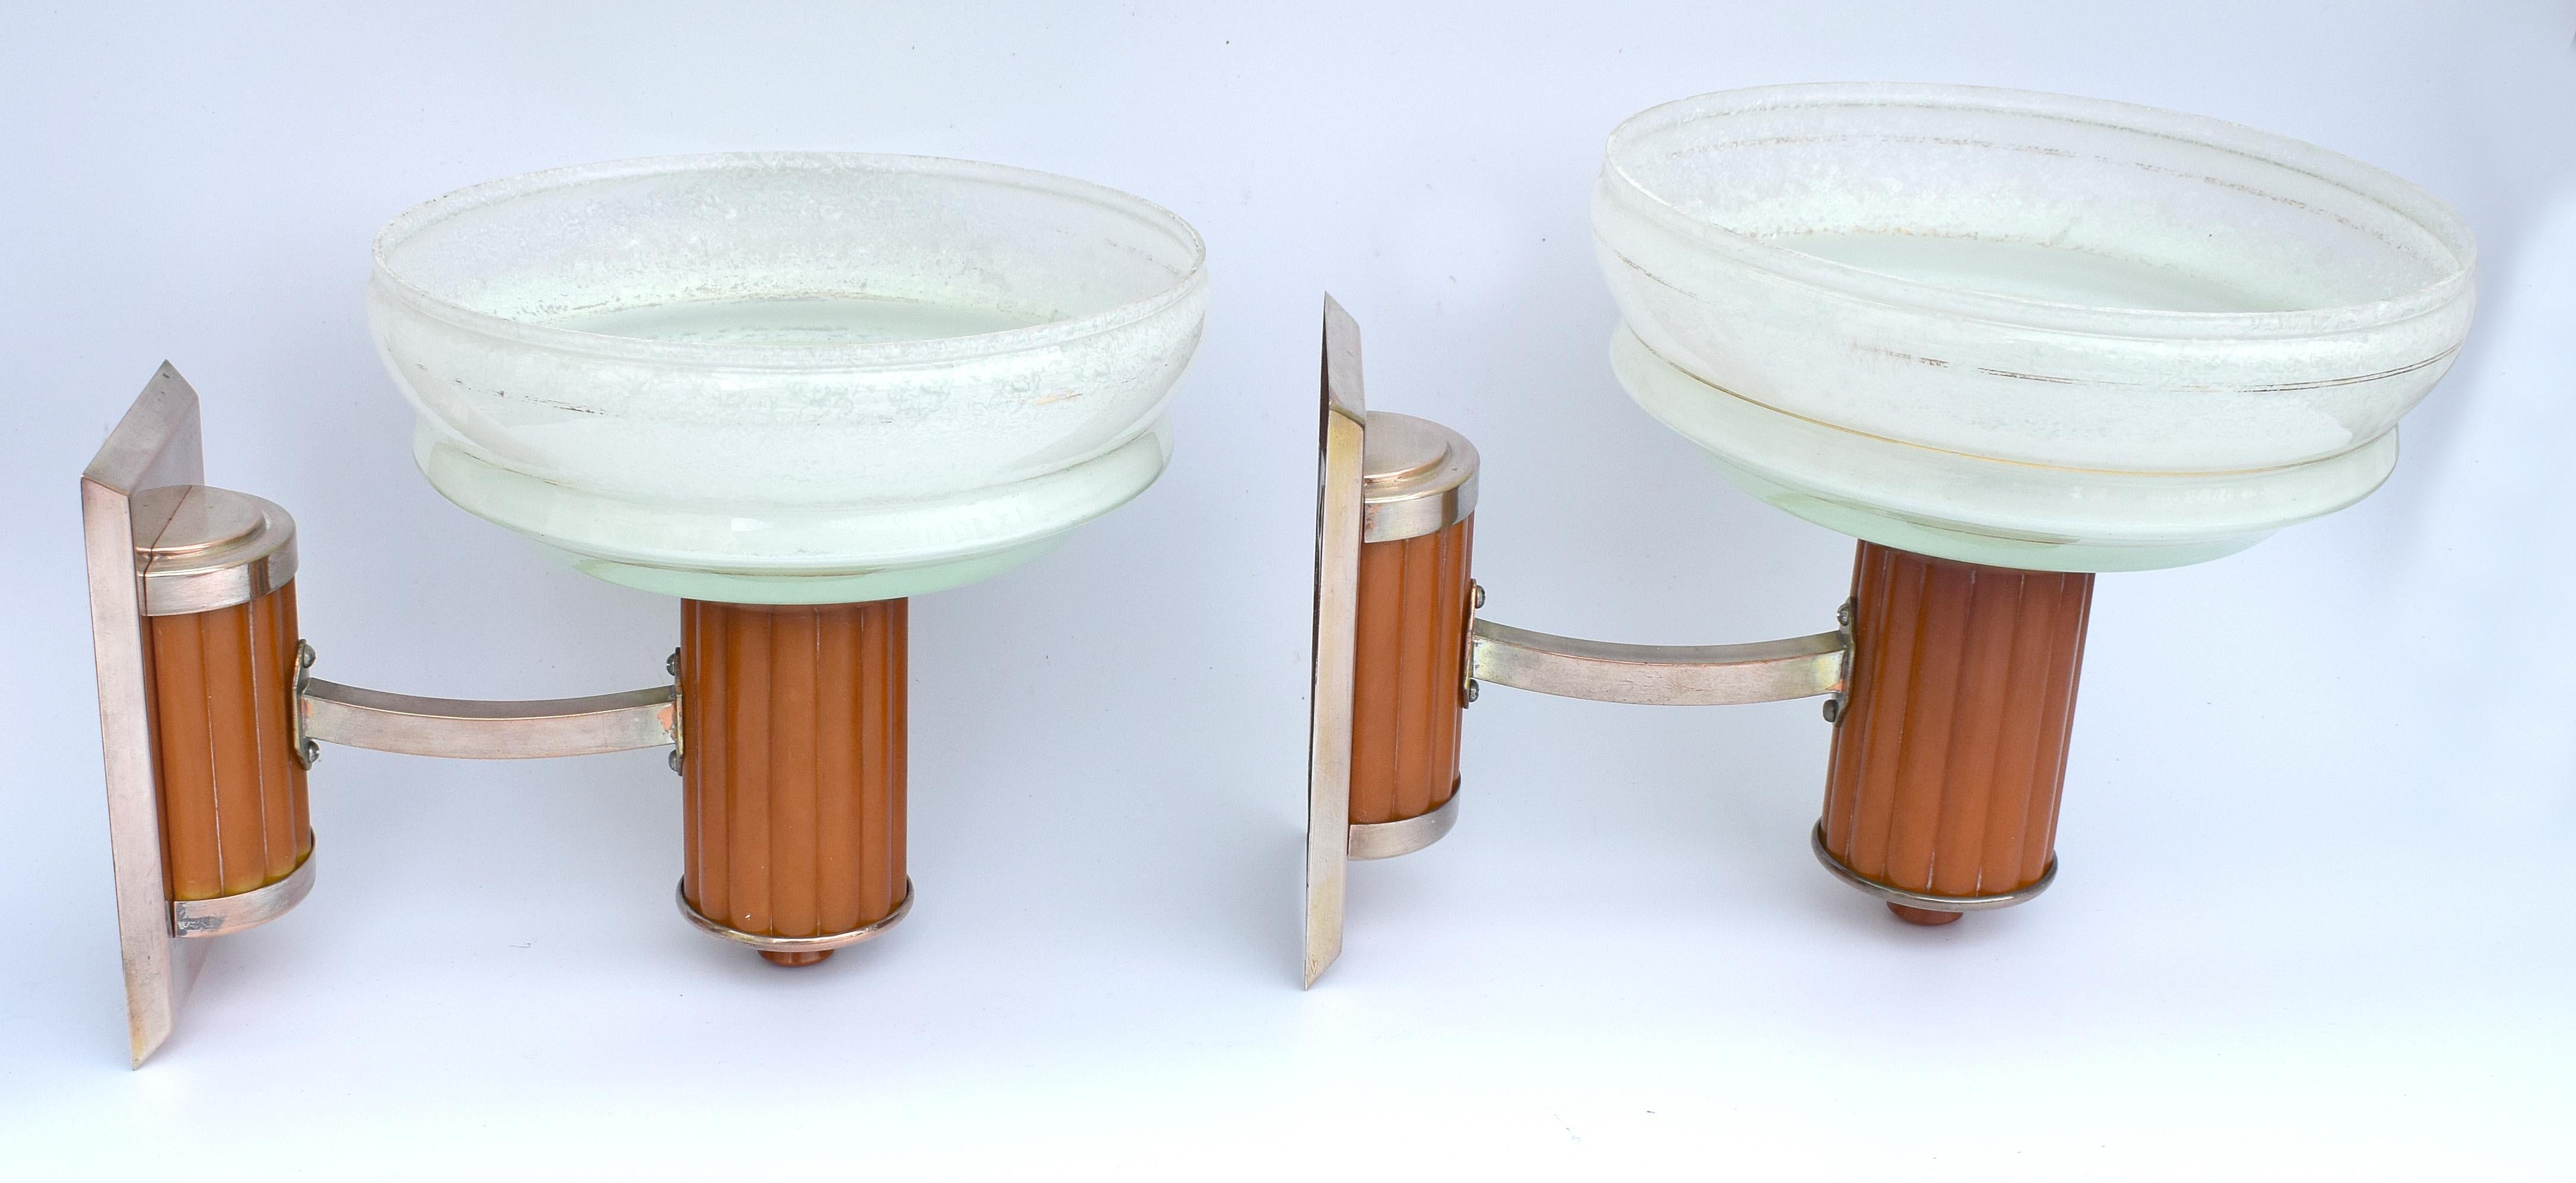 A very rare chance to acquire a pair of matching Art Deco wall light sconces. Made from butterscotch coloured catalin/phenolic Bakelite and chrome metal-ware with mottled glass pale green coloured shades. These lights make a great statement to any